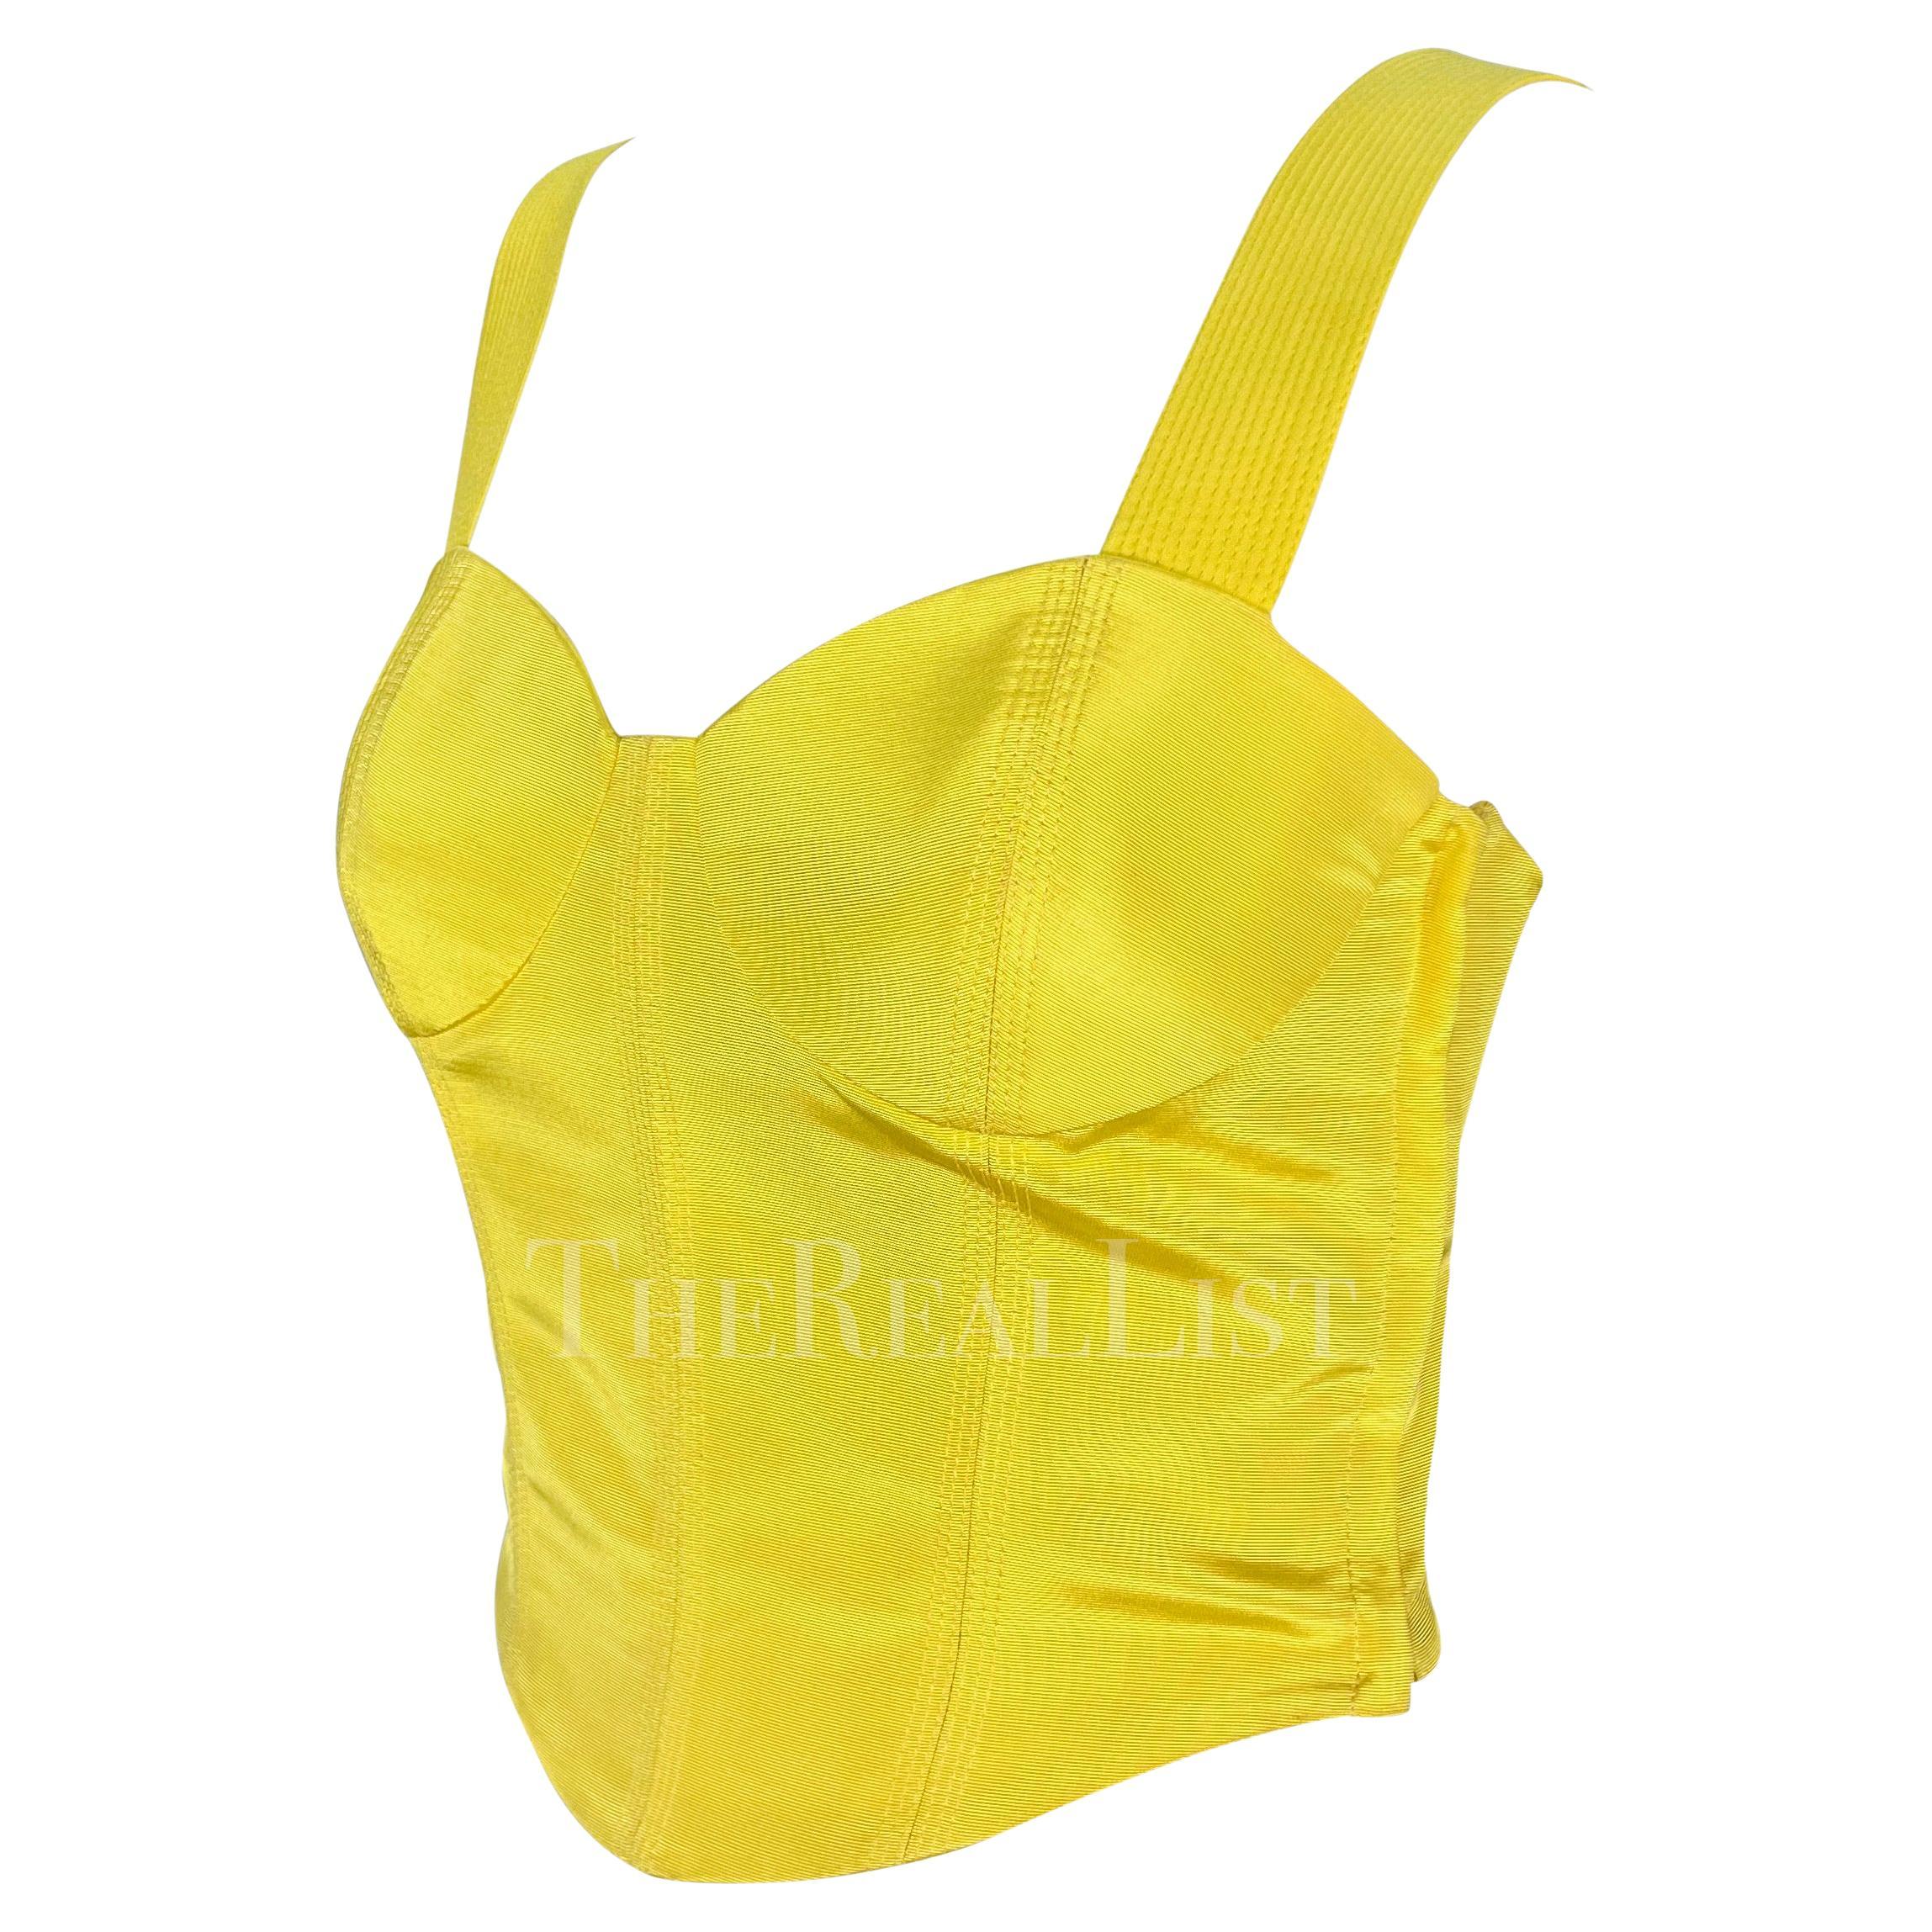 Presenting a chic bright yellow Gianni Versace crop top, designed by Gianni Versace. From the Spring/Summer 1992 collection, this bright yellow top, distinguished by a fitted silhouette, cupped bust, quilted shoulder straps, and a low back, this top